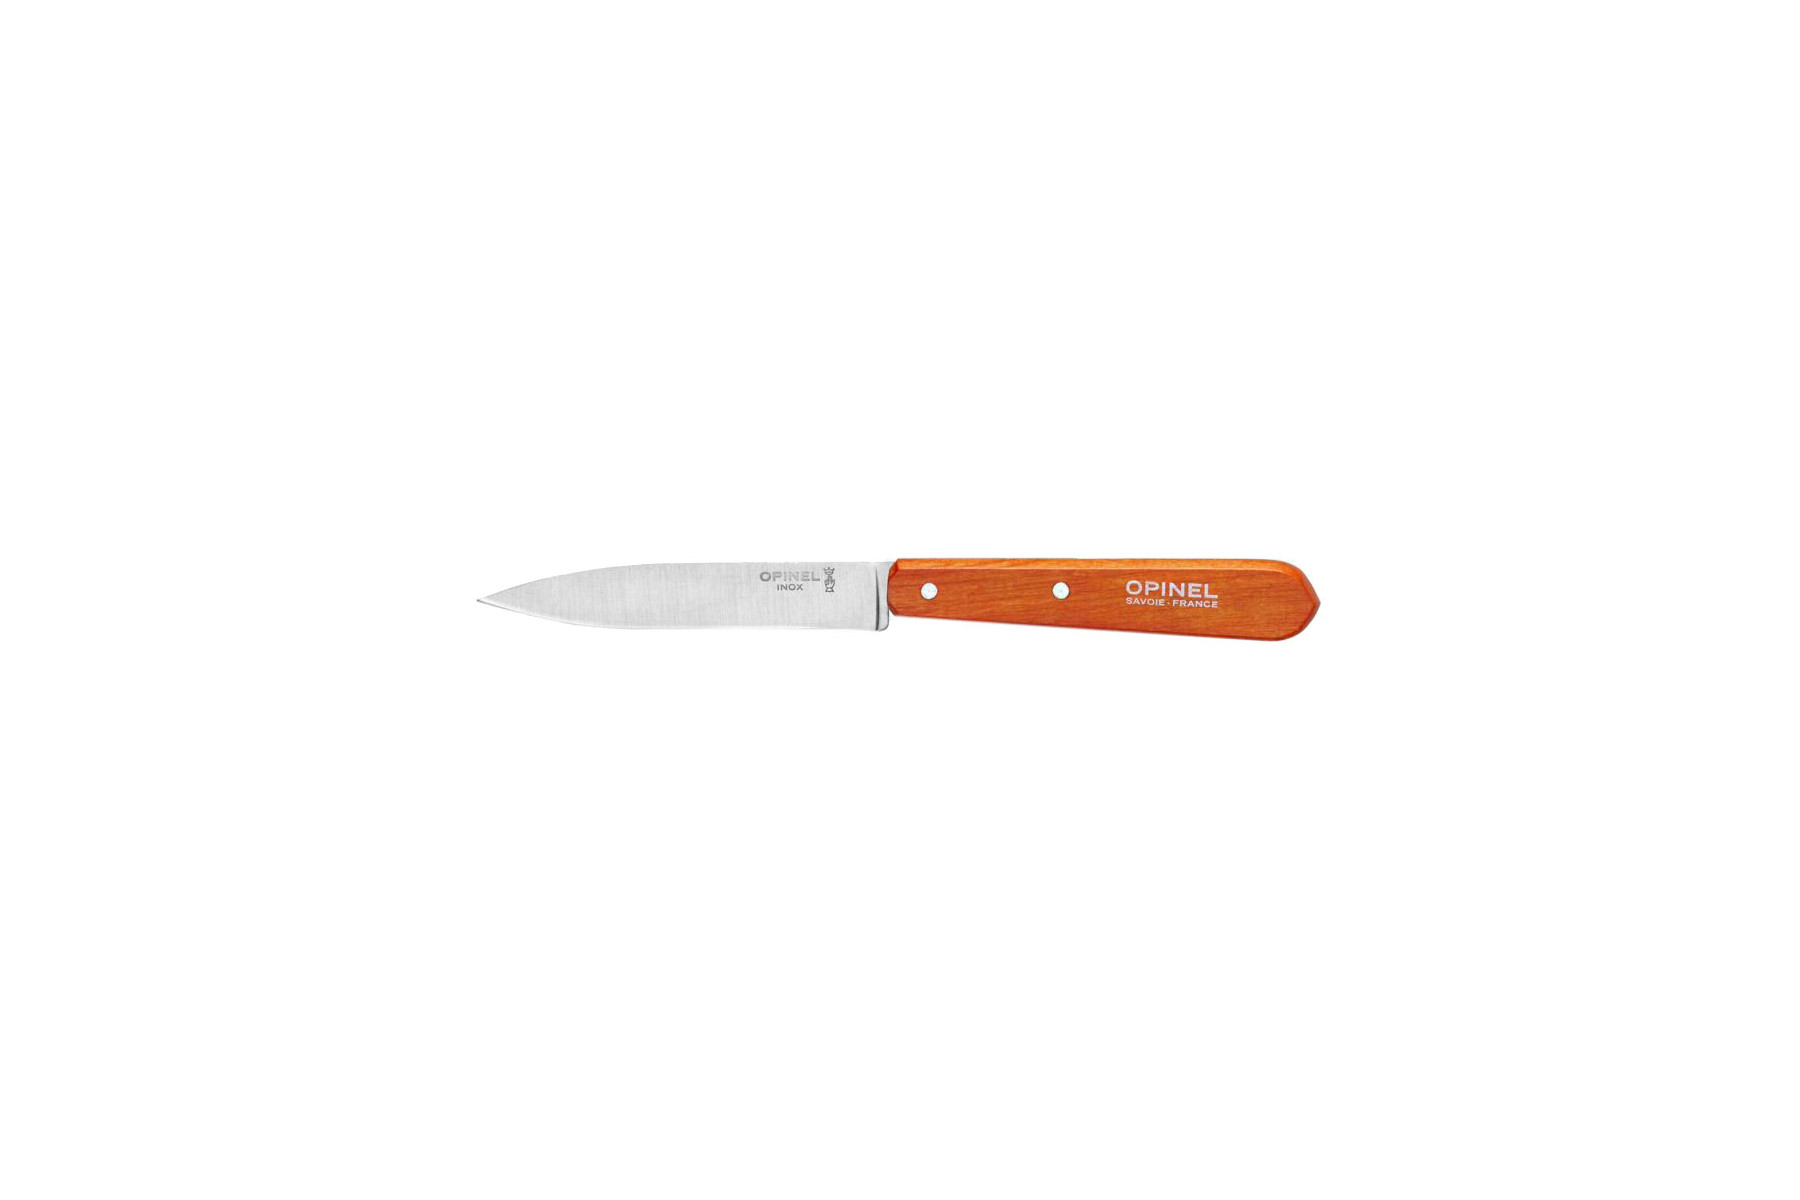 Couteau d'office OPINEL n°112 - Manche mandarine